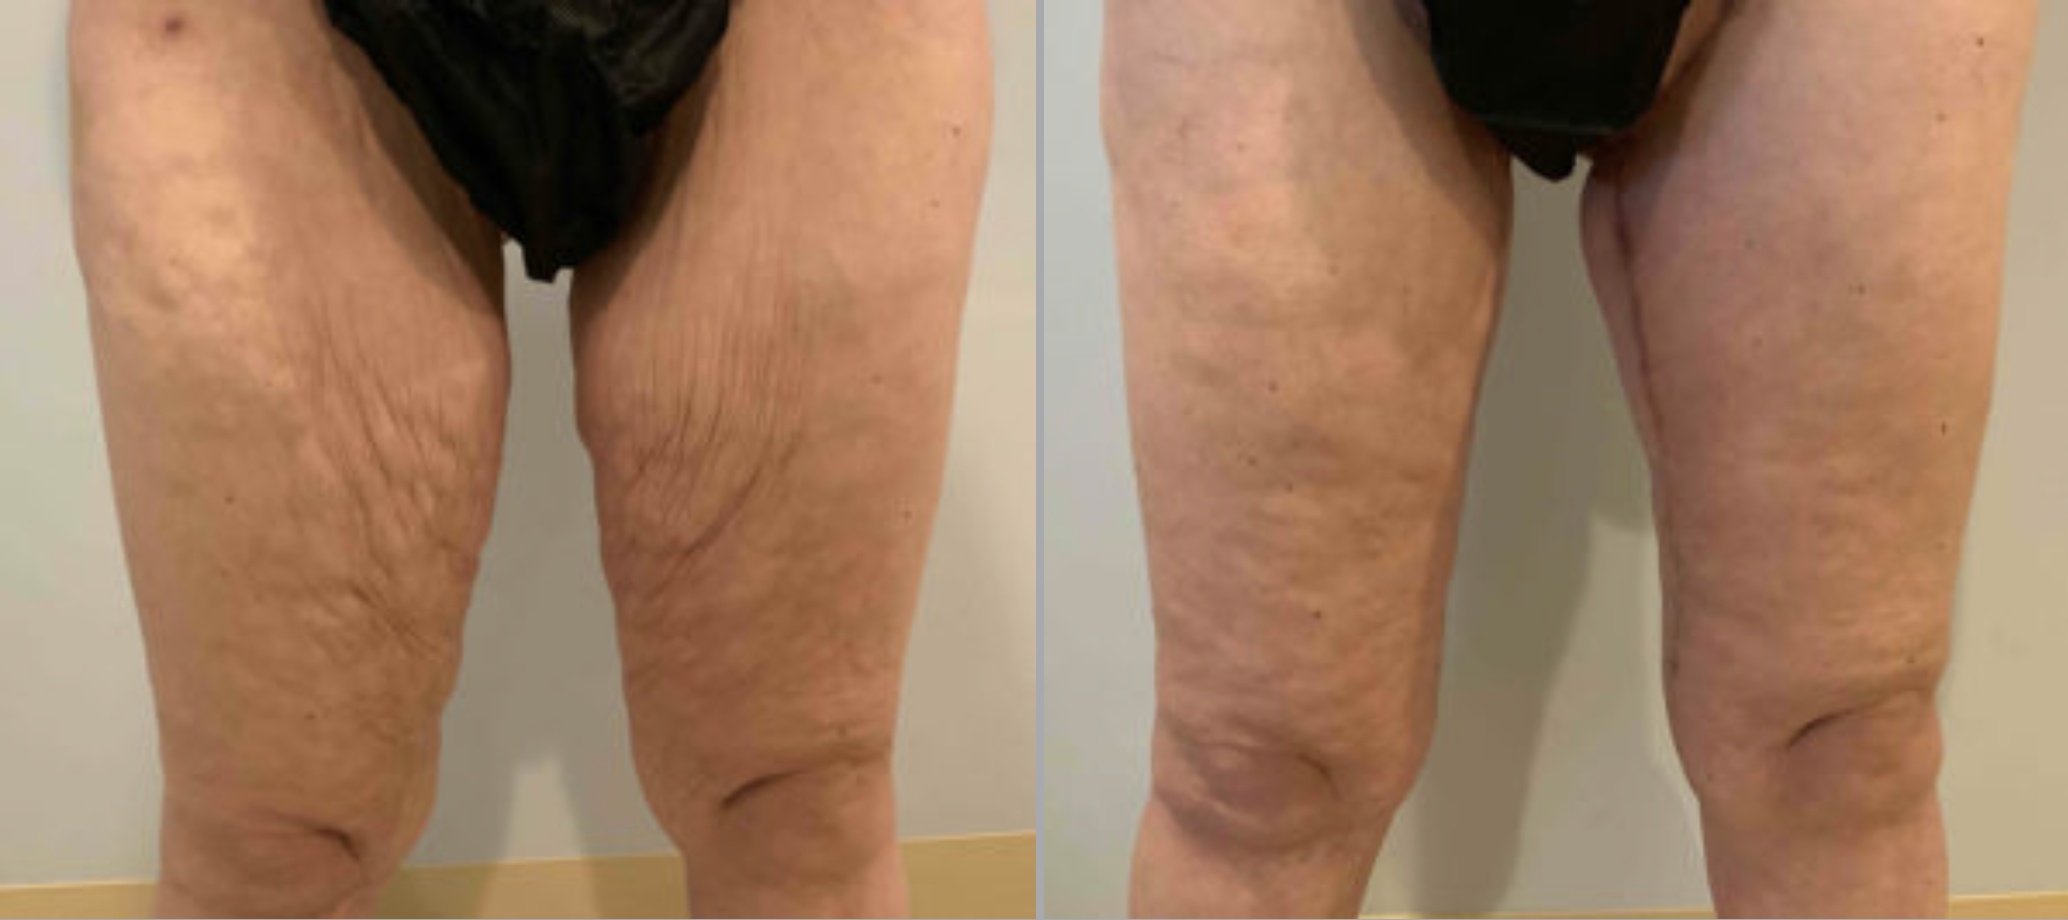 Thigh Lift Before and After Pictures in Bucks County, PA and Hunterdon County, NJ